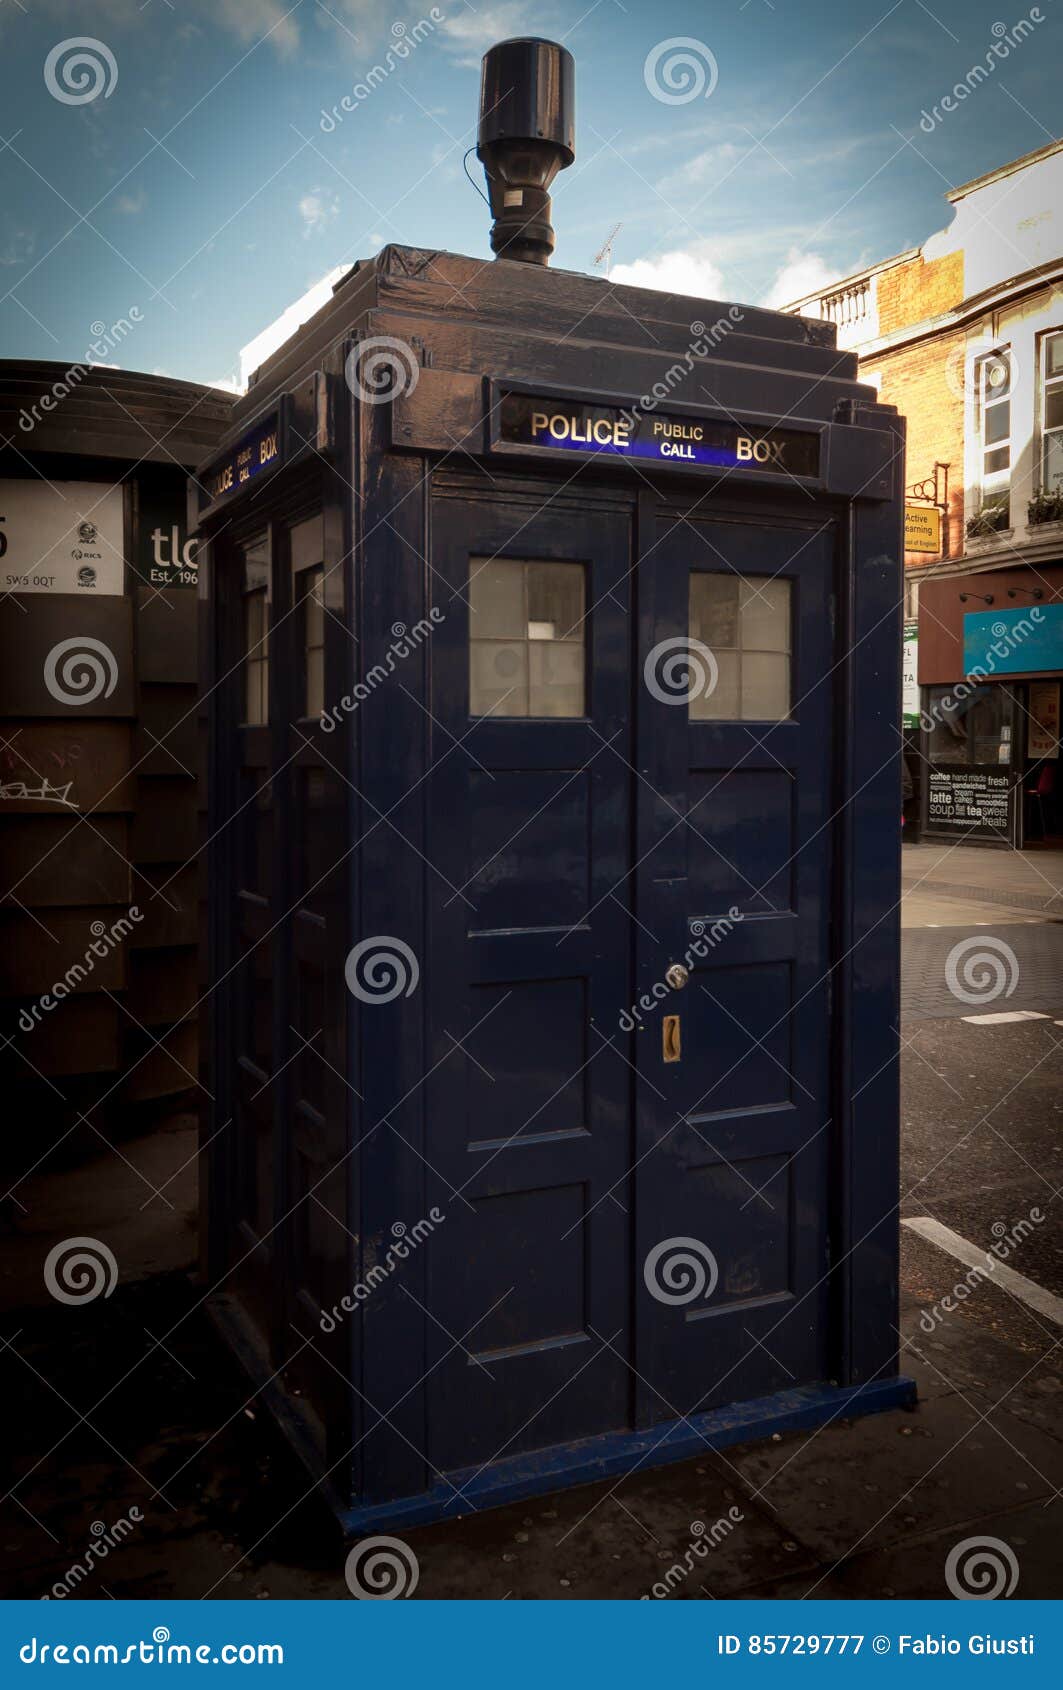 Blue Public Call Police Box in London Stock Image - Image of vintage ...